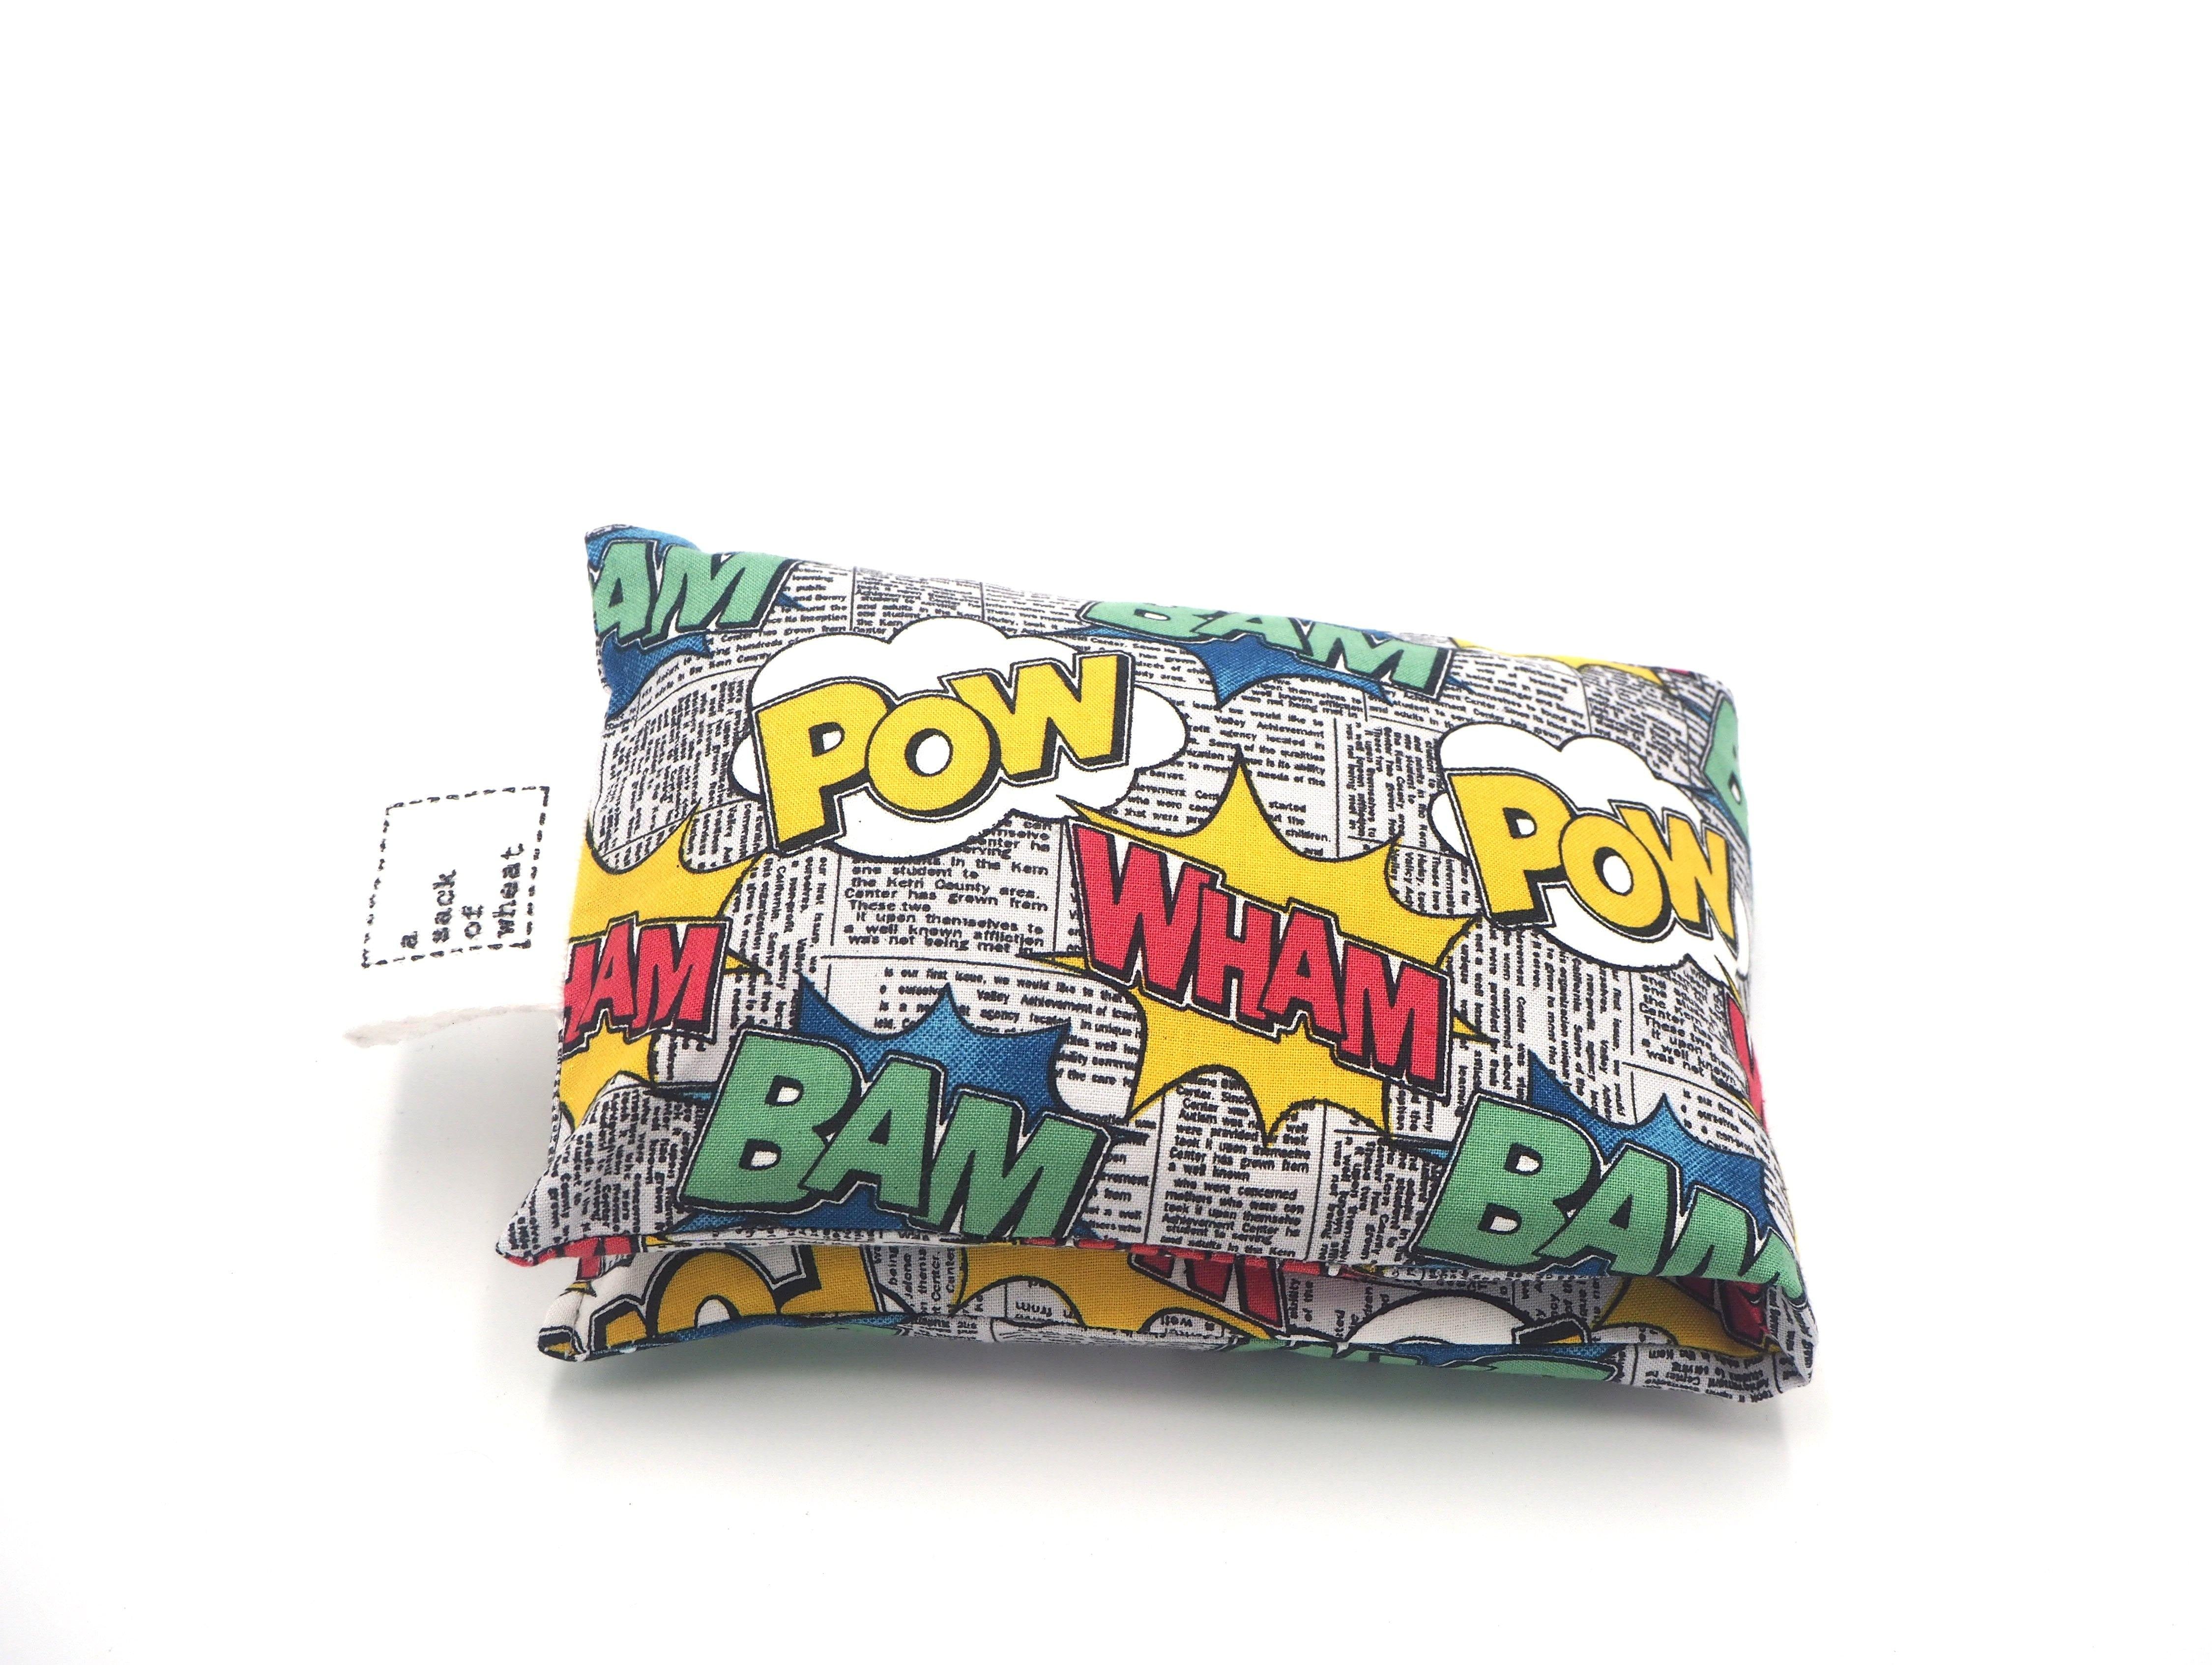 Folded view of A Sack Of Wheat, featuring Wham! Bam! Pow! - Action Words on Newspaper Print themed 100% cotton fabric